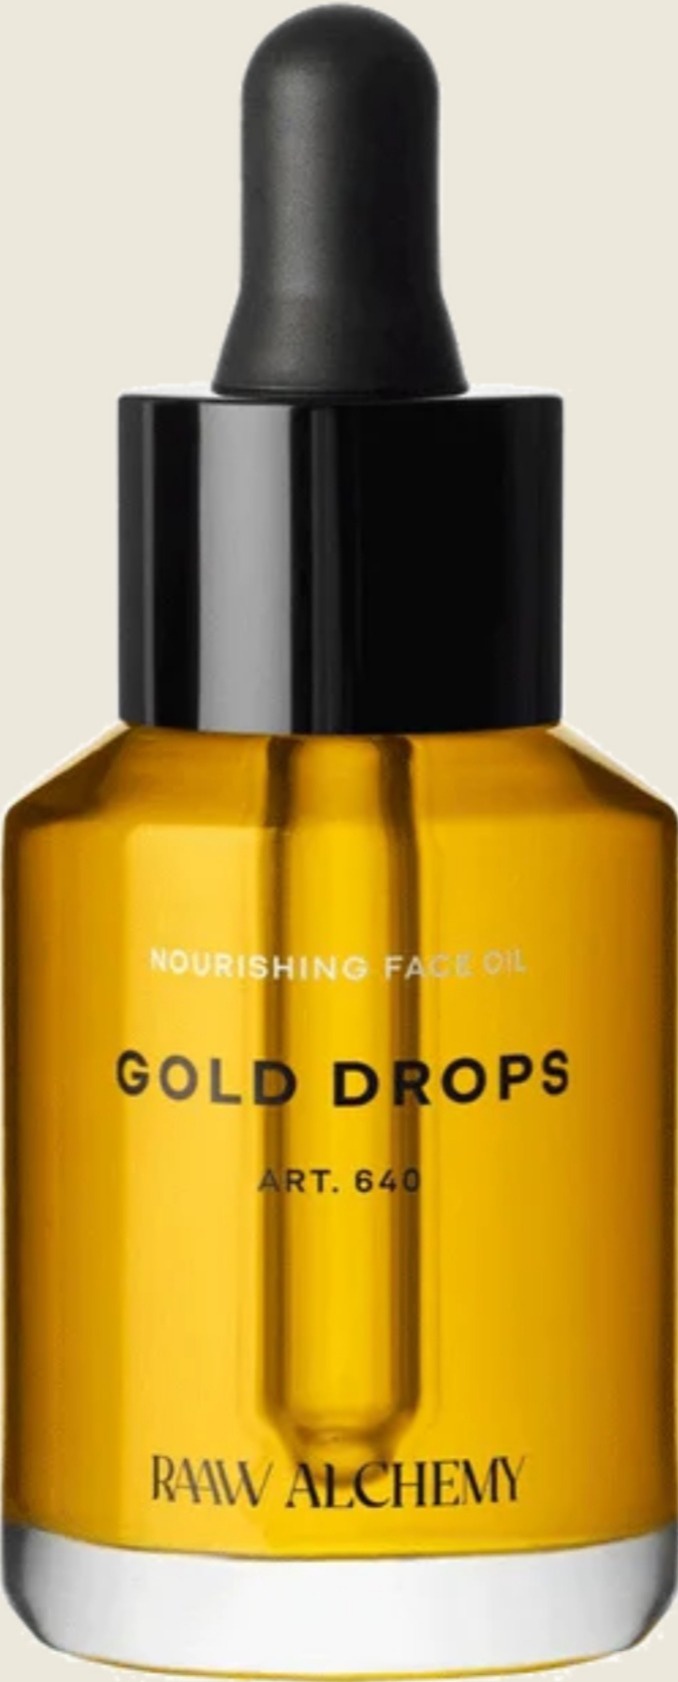 Raaw Alchemy Gold Drops Nourishing Face Oil